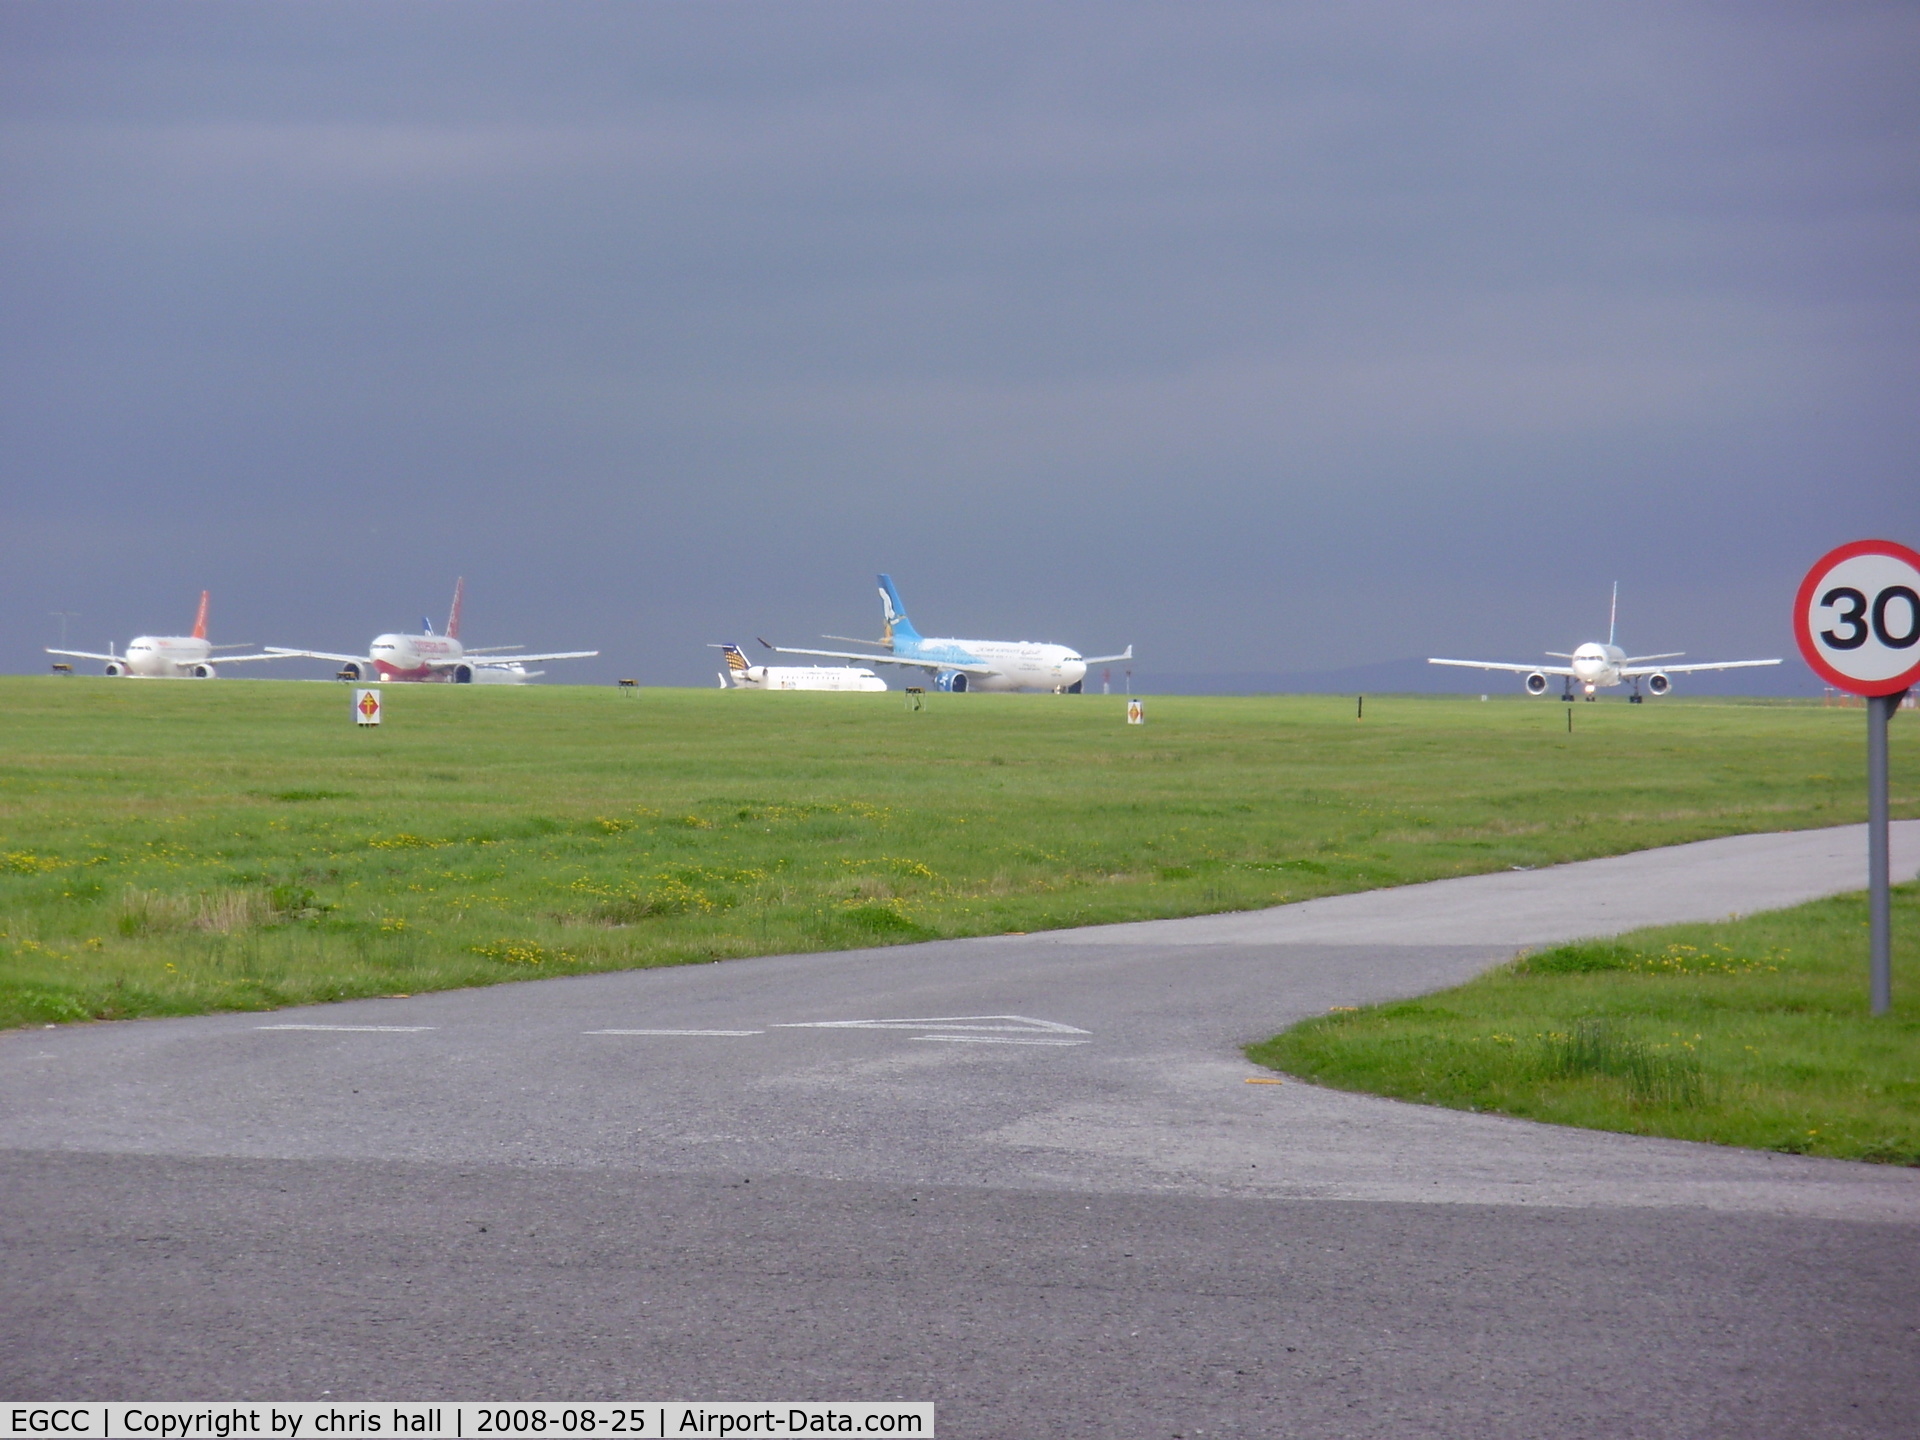 Manchester Airport, Manchester, England United Kingdom (EGCC) - 3.00pm at Manchester Airport with six aircraft waiting for runway 23L to reopen for afternoon flights